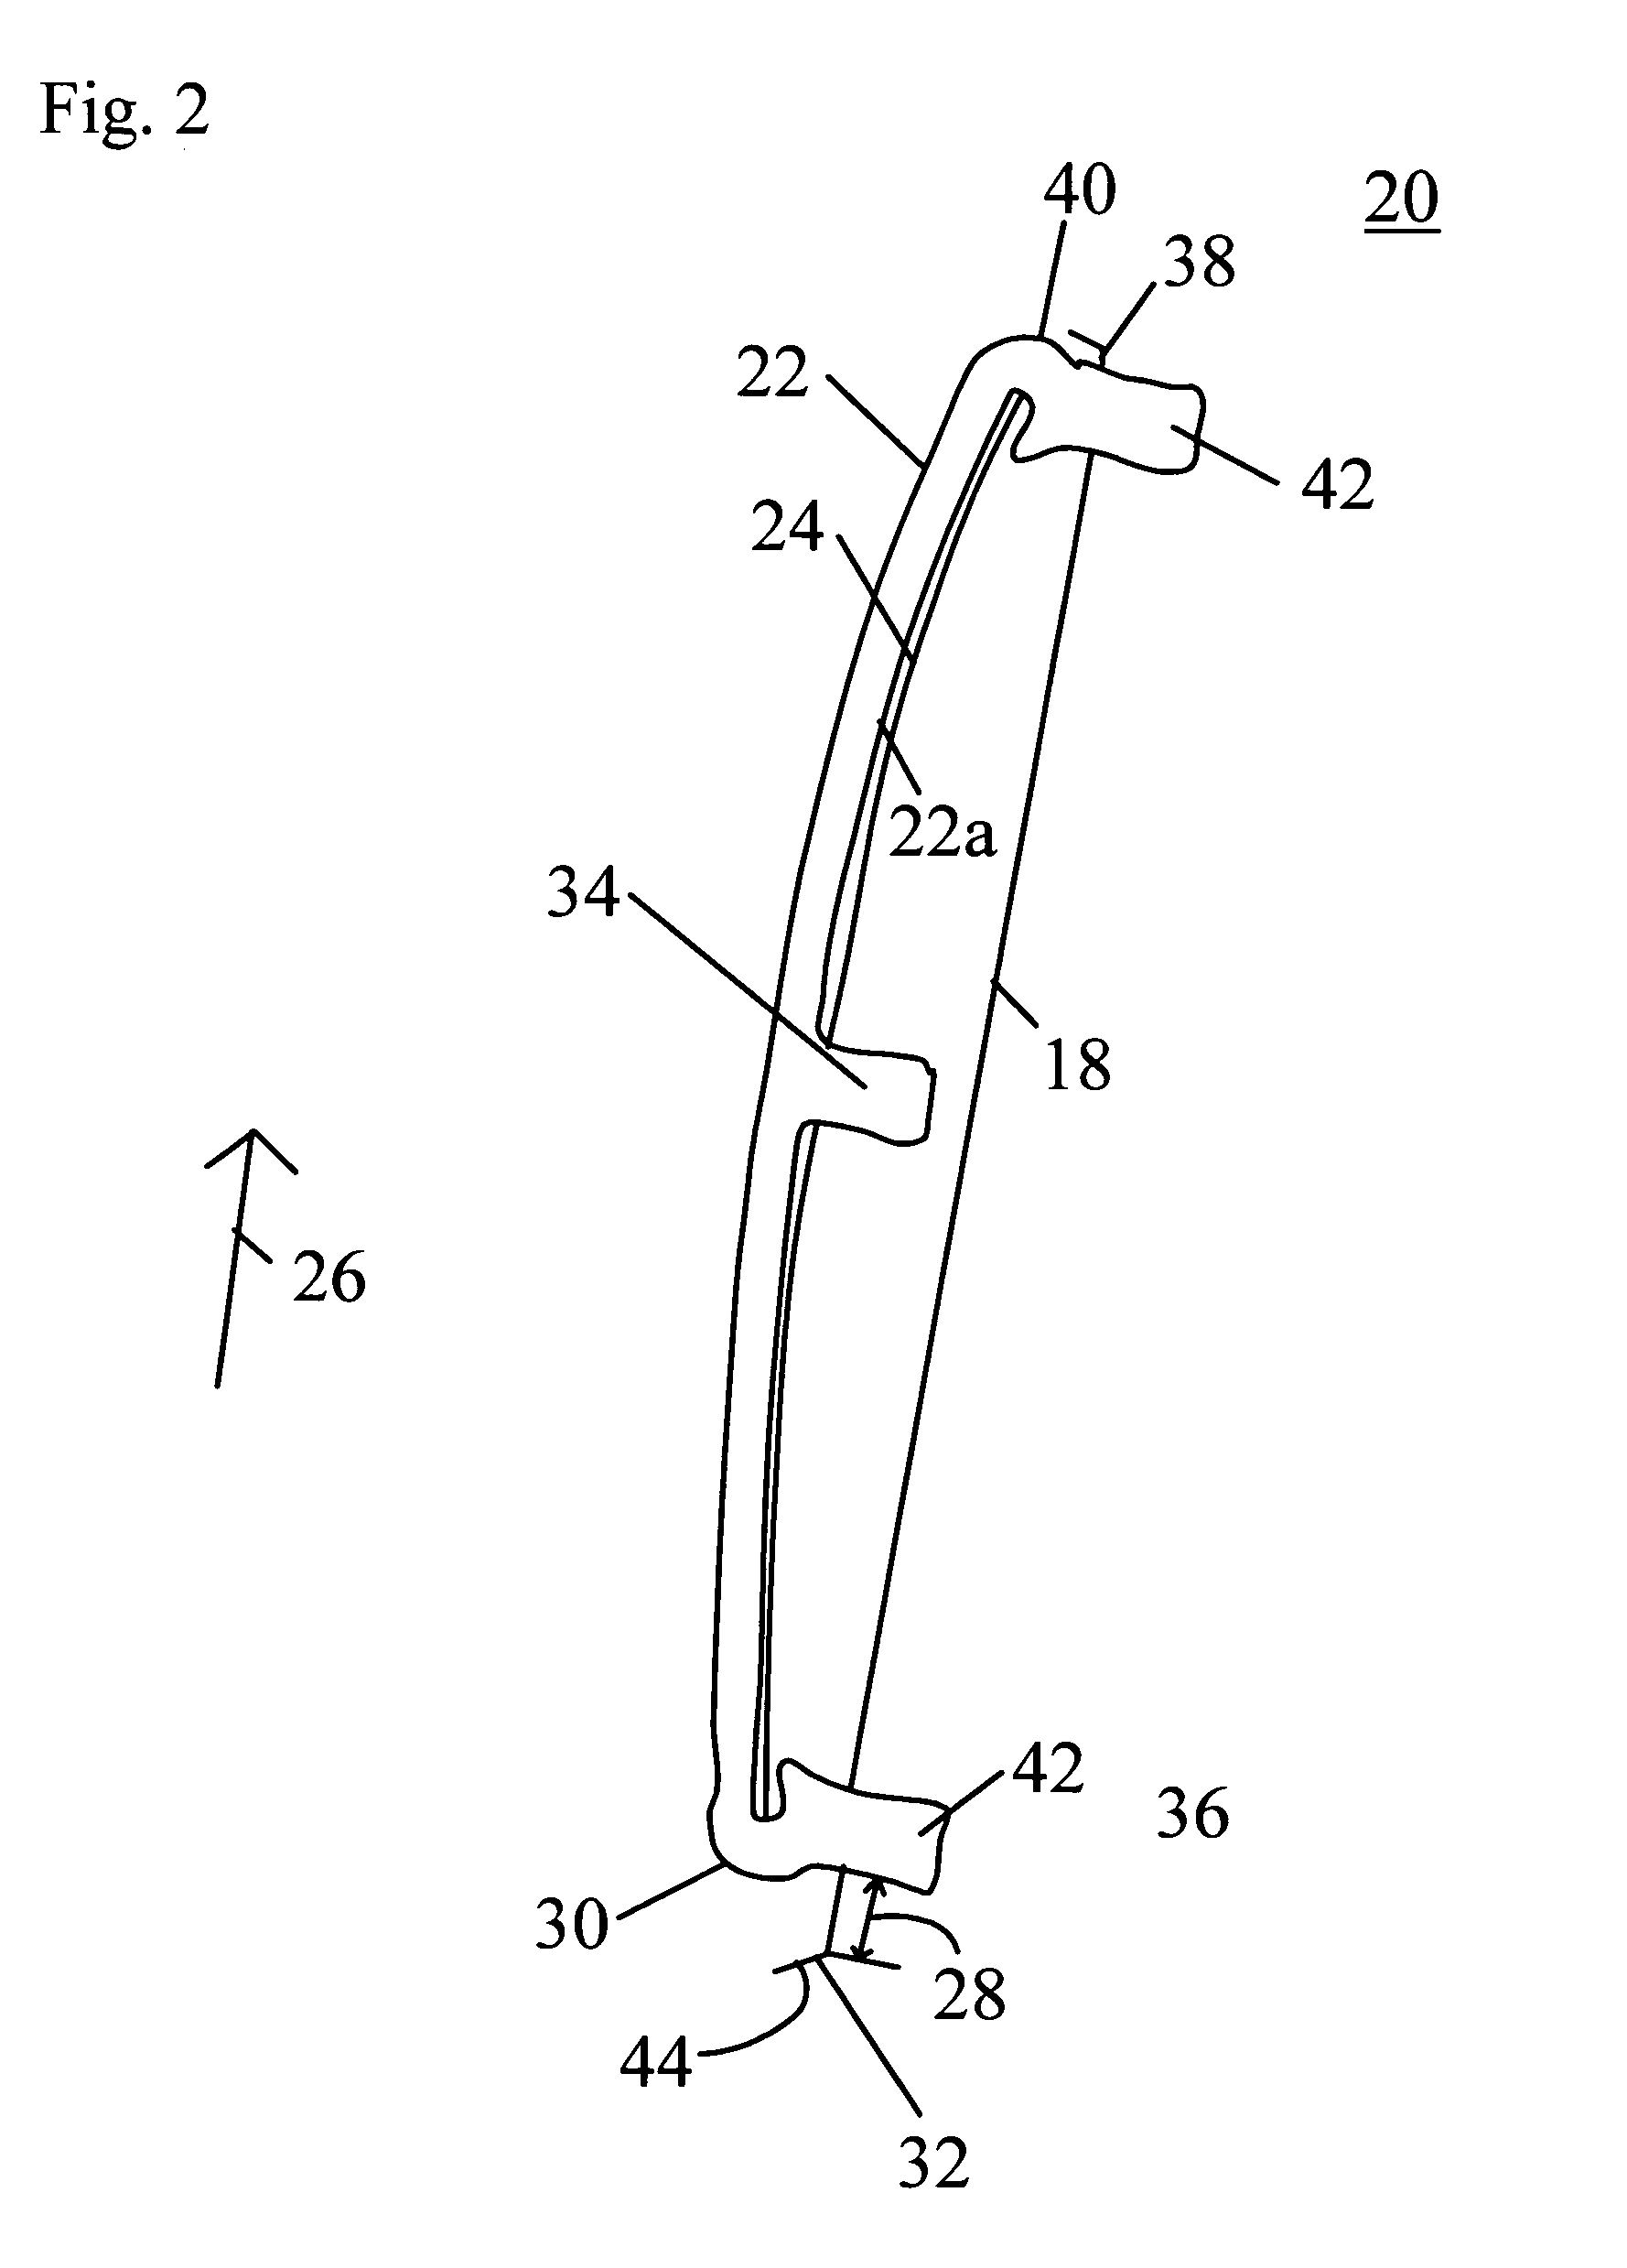 Compliant chain guide with blade spring